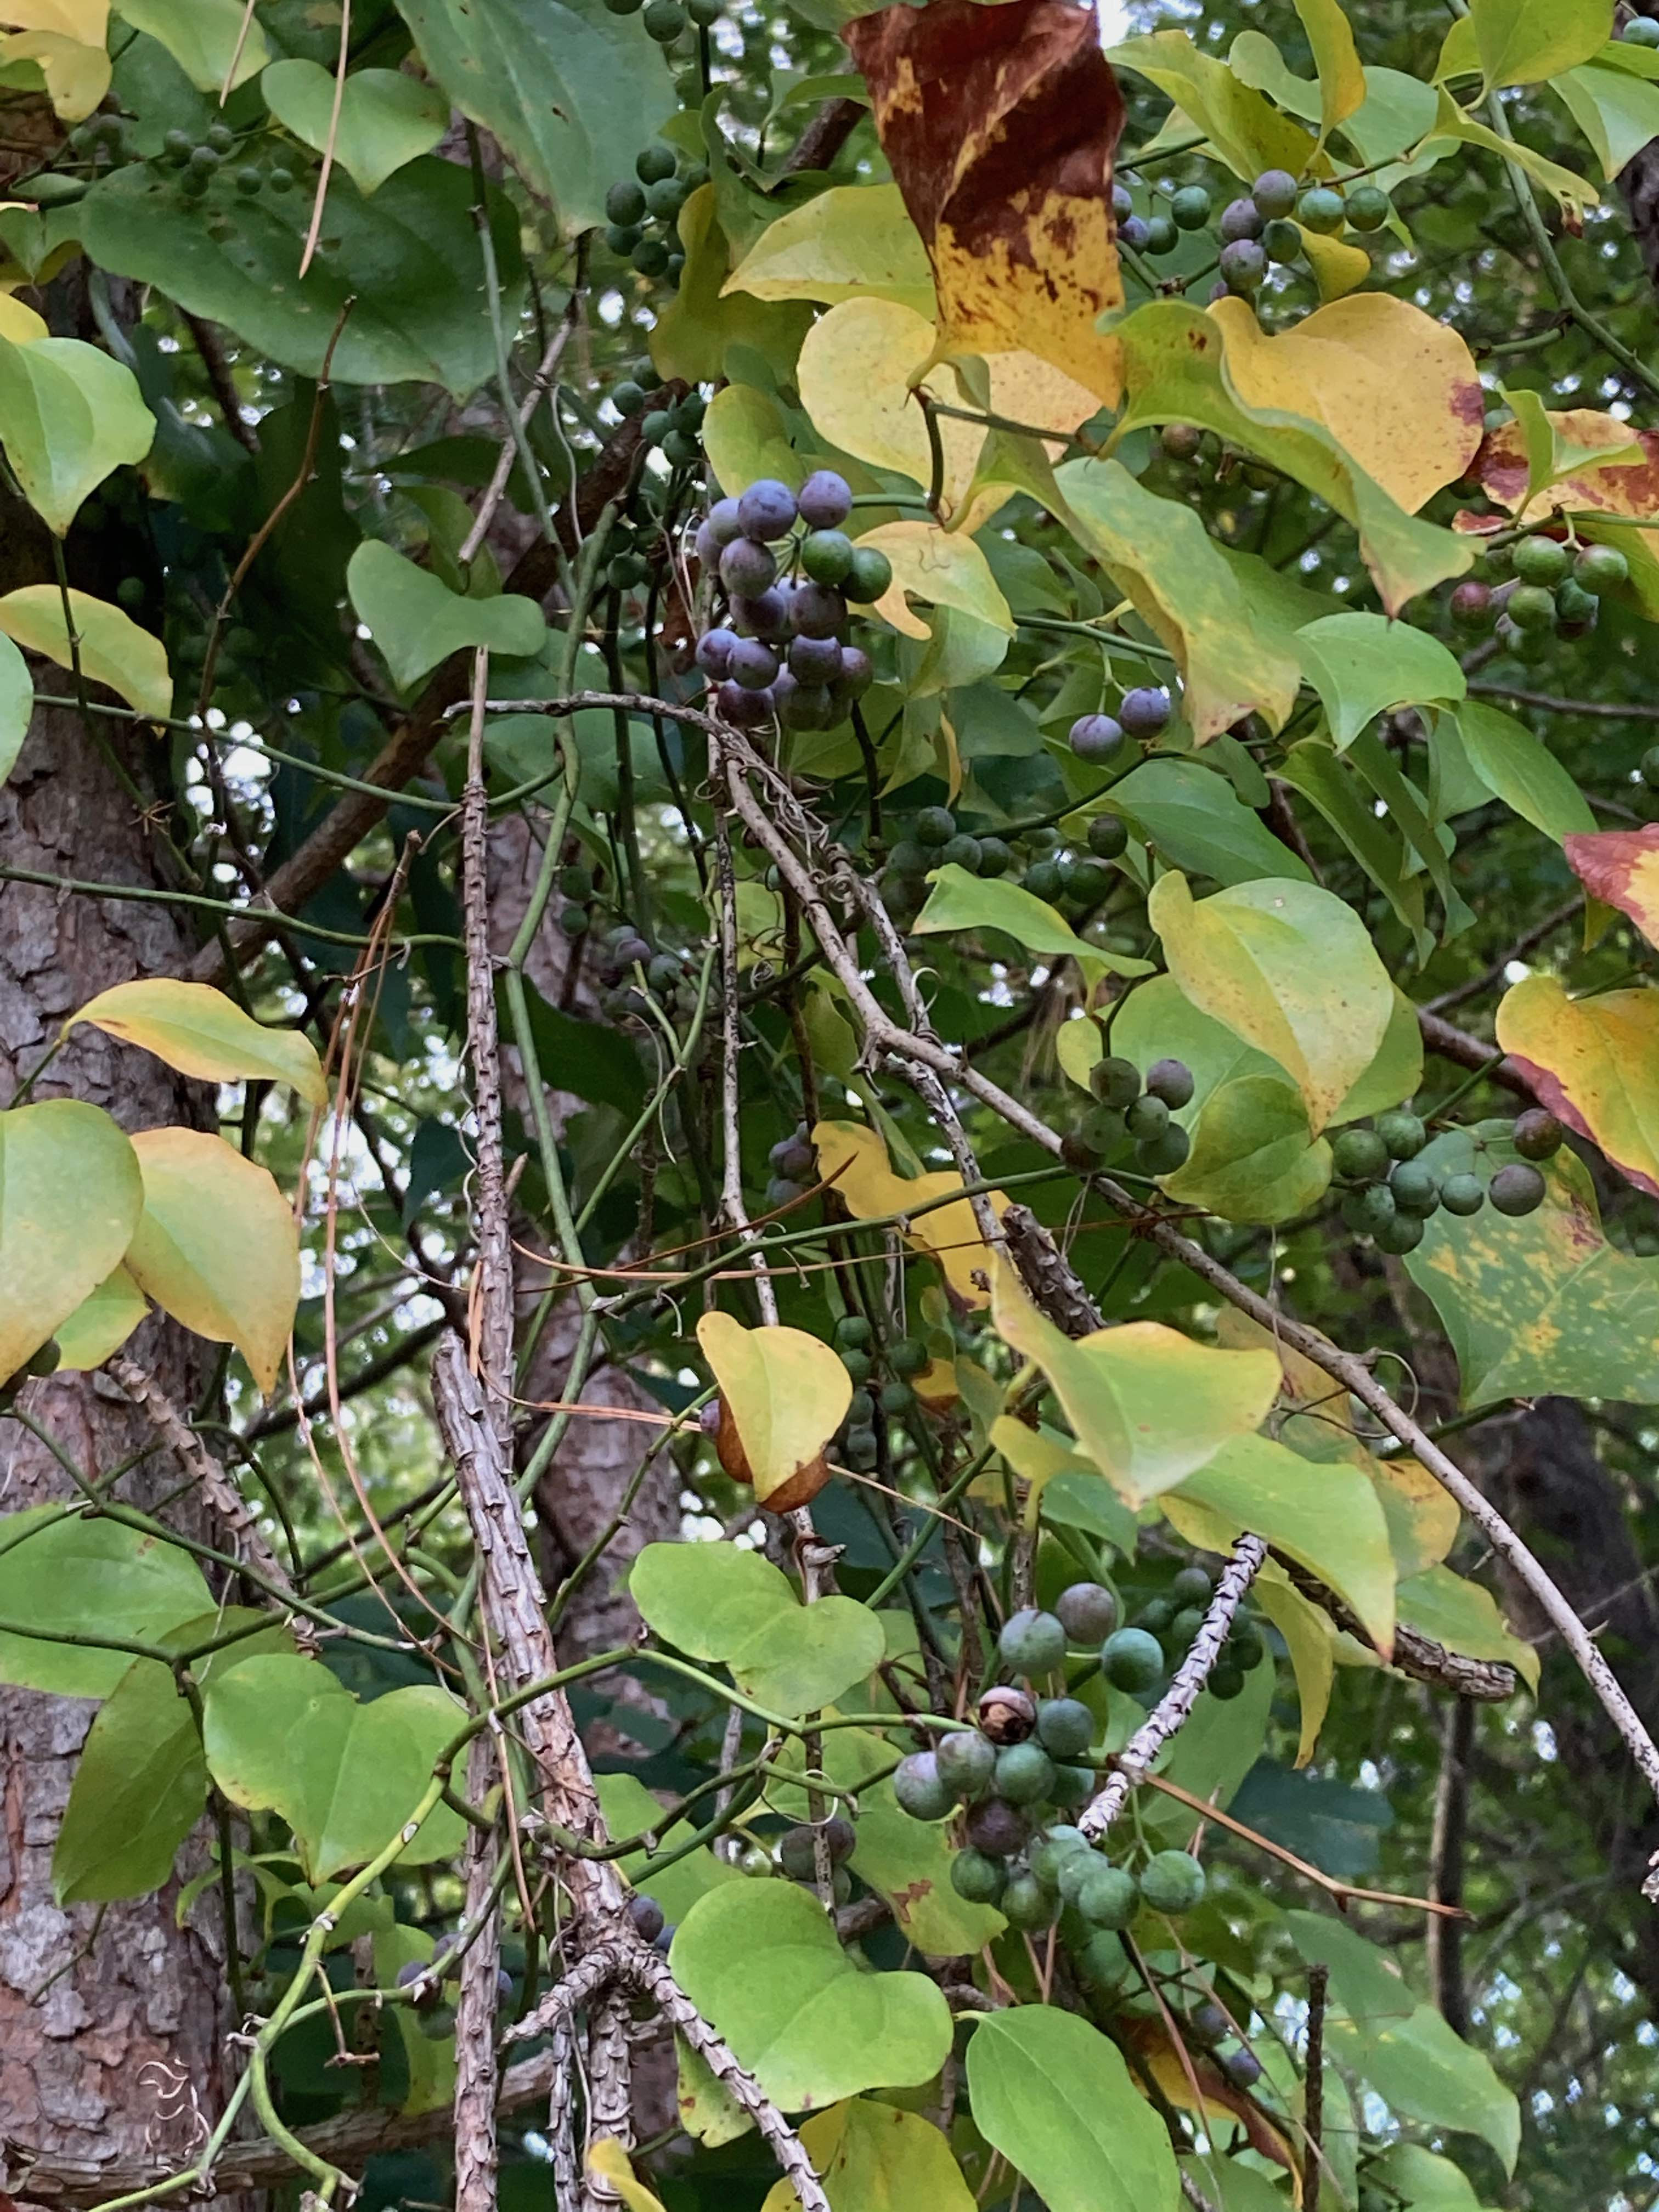 The Scientific Name is Smilax rotundifolia. You will likely hear them called Common Greenbriar, Bullbriar, Horsebriar. This picture shows the High climbing vine with stout thorns. of Smilax rotundifolia